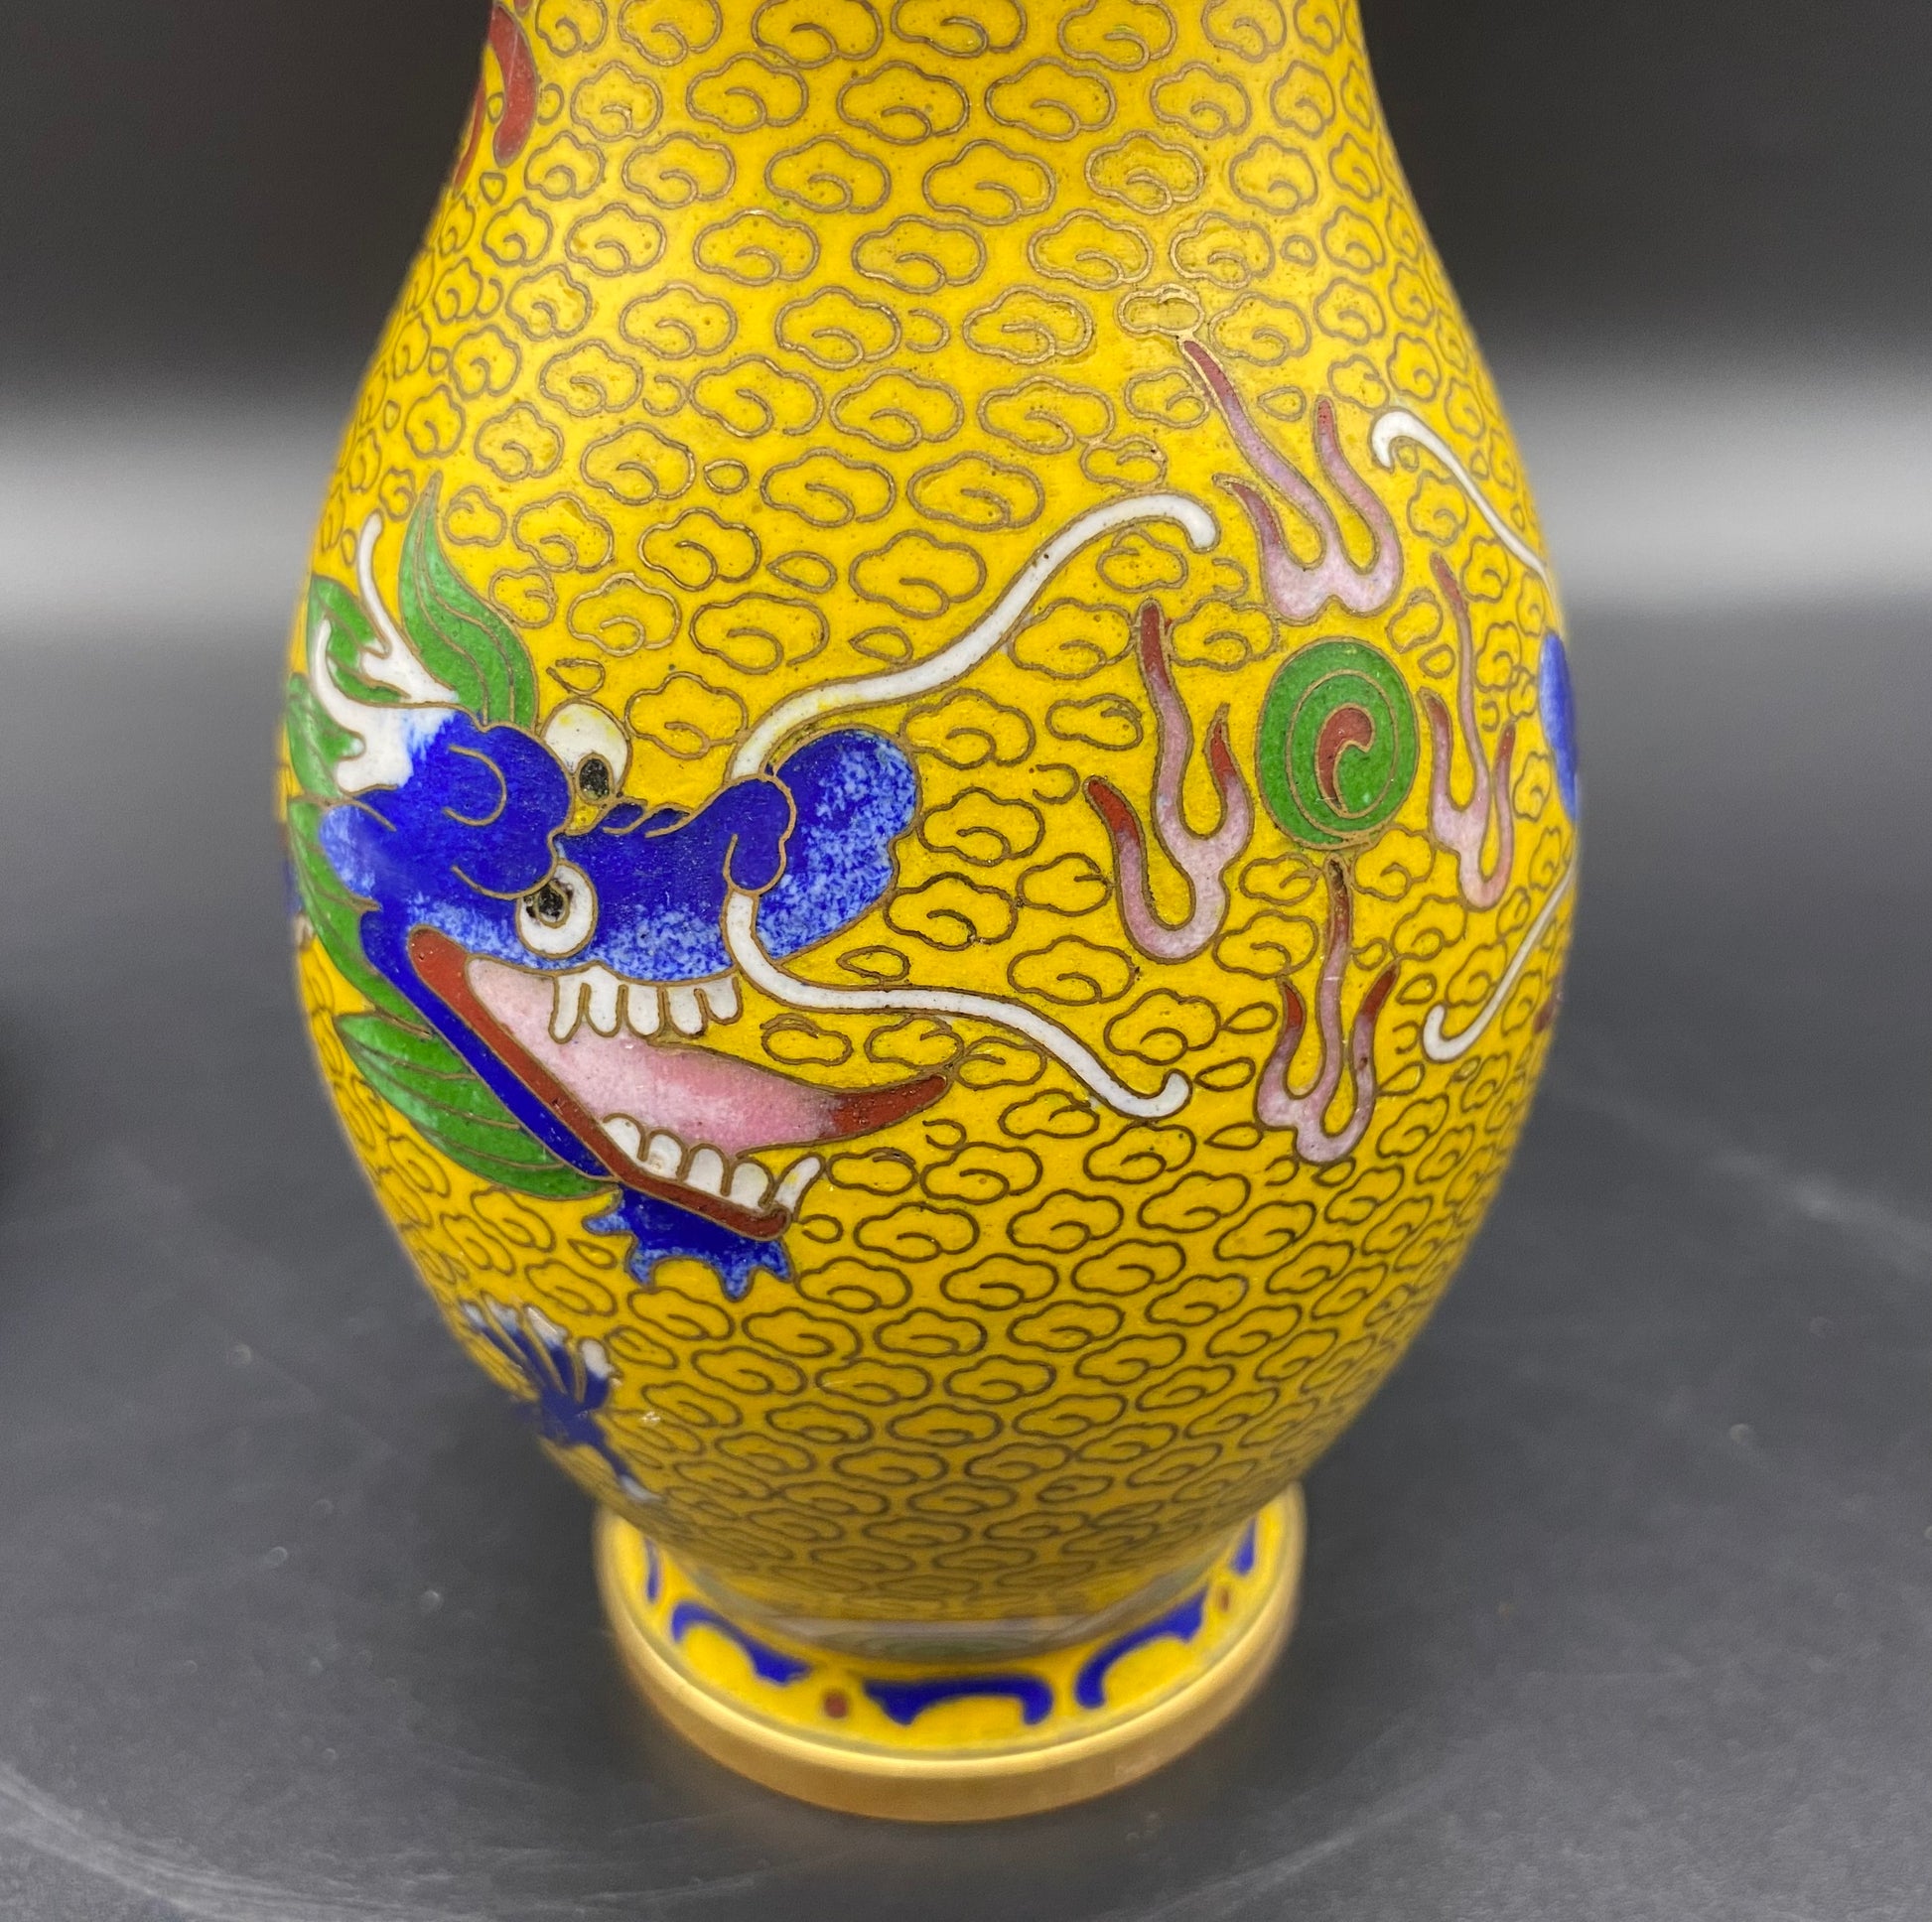 Fine heavy antique Chinese cloisonne lidded vase with golden decorated cells on a black background with flowers, buds and butterflies in hues of pinks greens and purples, with golden accents.